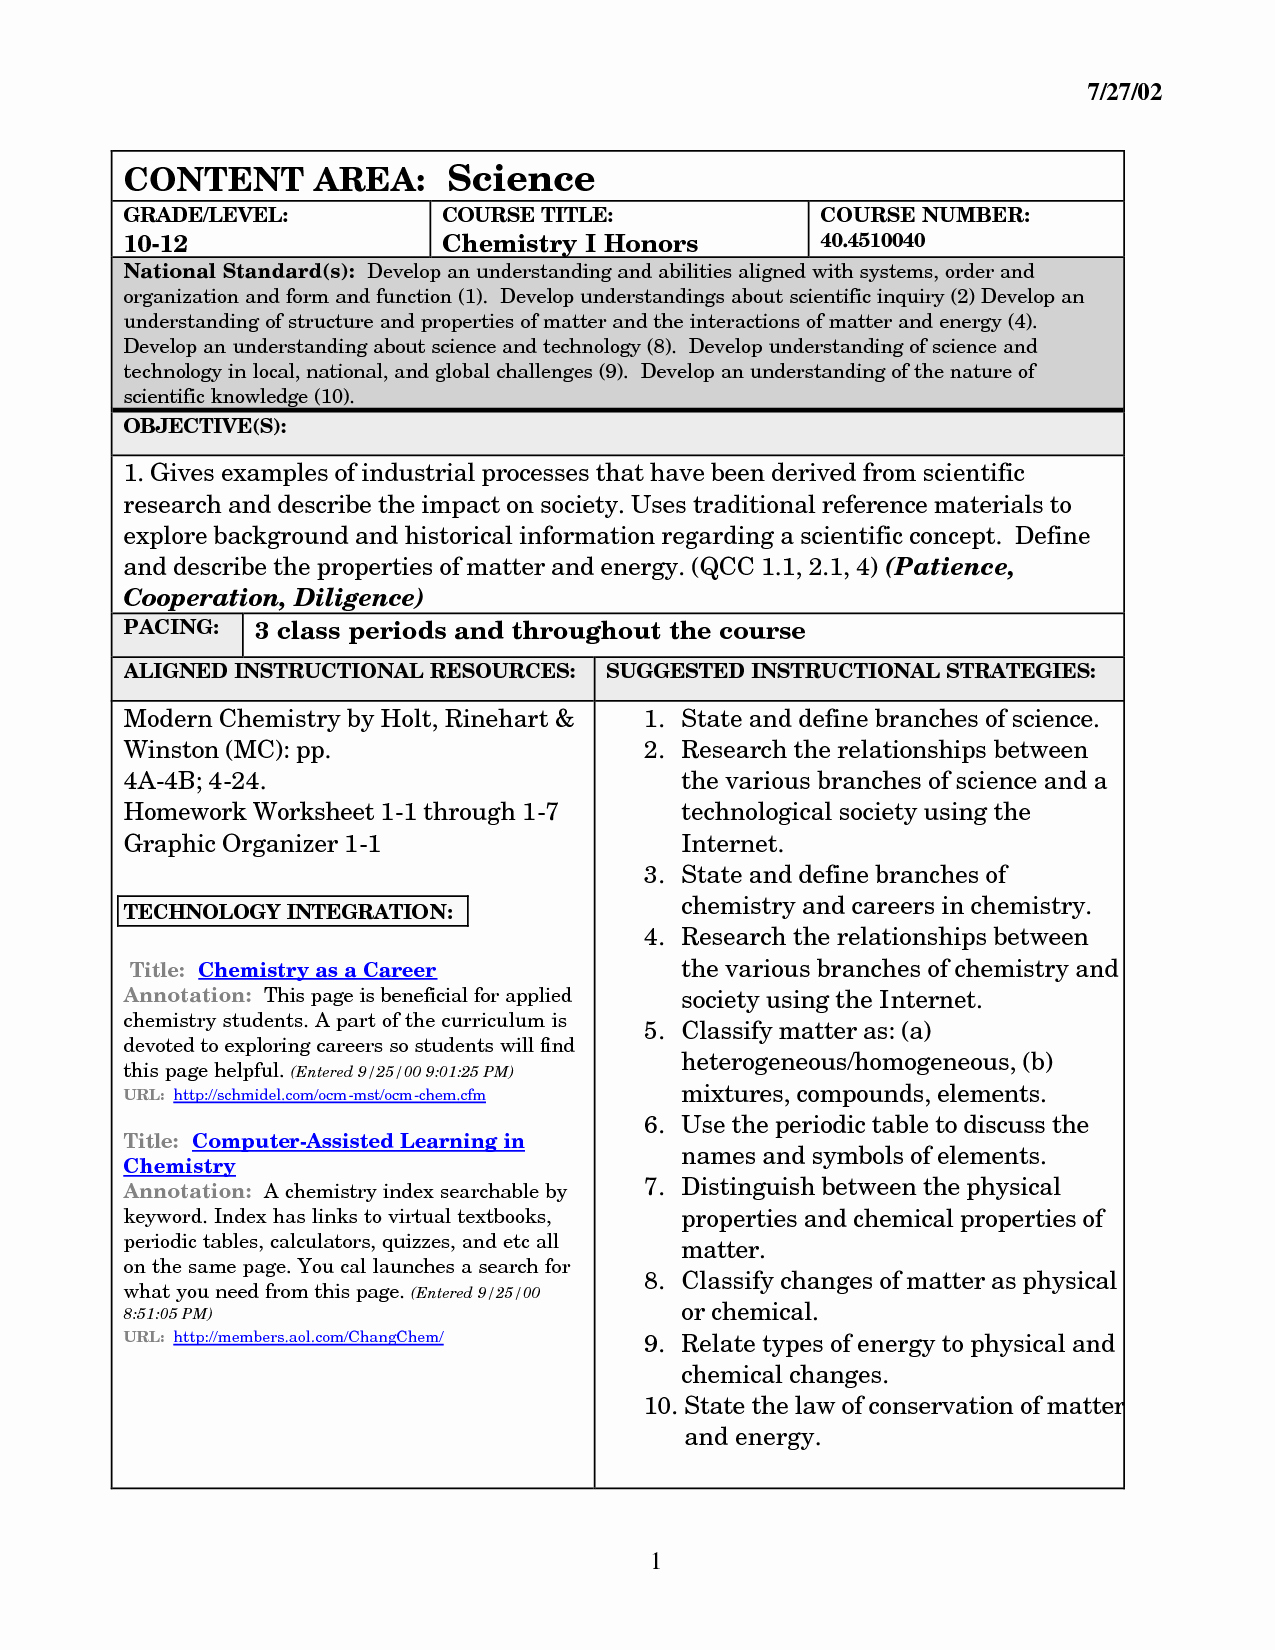 Classifying Matter Worksheet Answer Key Fresh 15 Best Of Classifying Chemical Reactions Worksheet